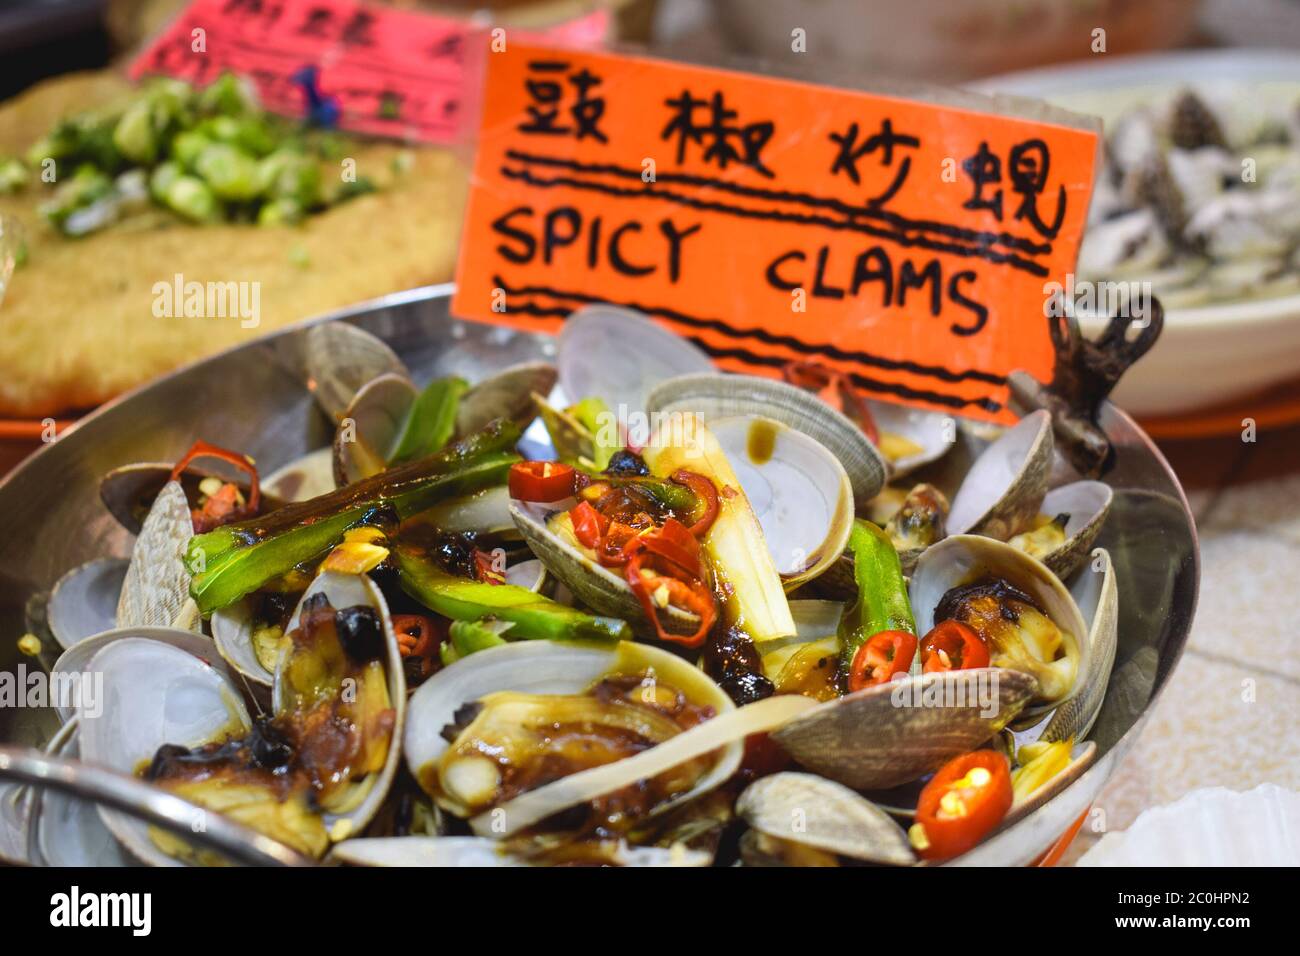 Hot pot with spicy clams sold on a street market in Hong Kong China Stock Photo